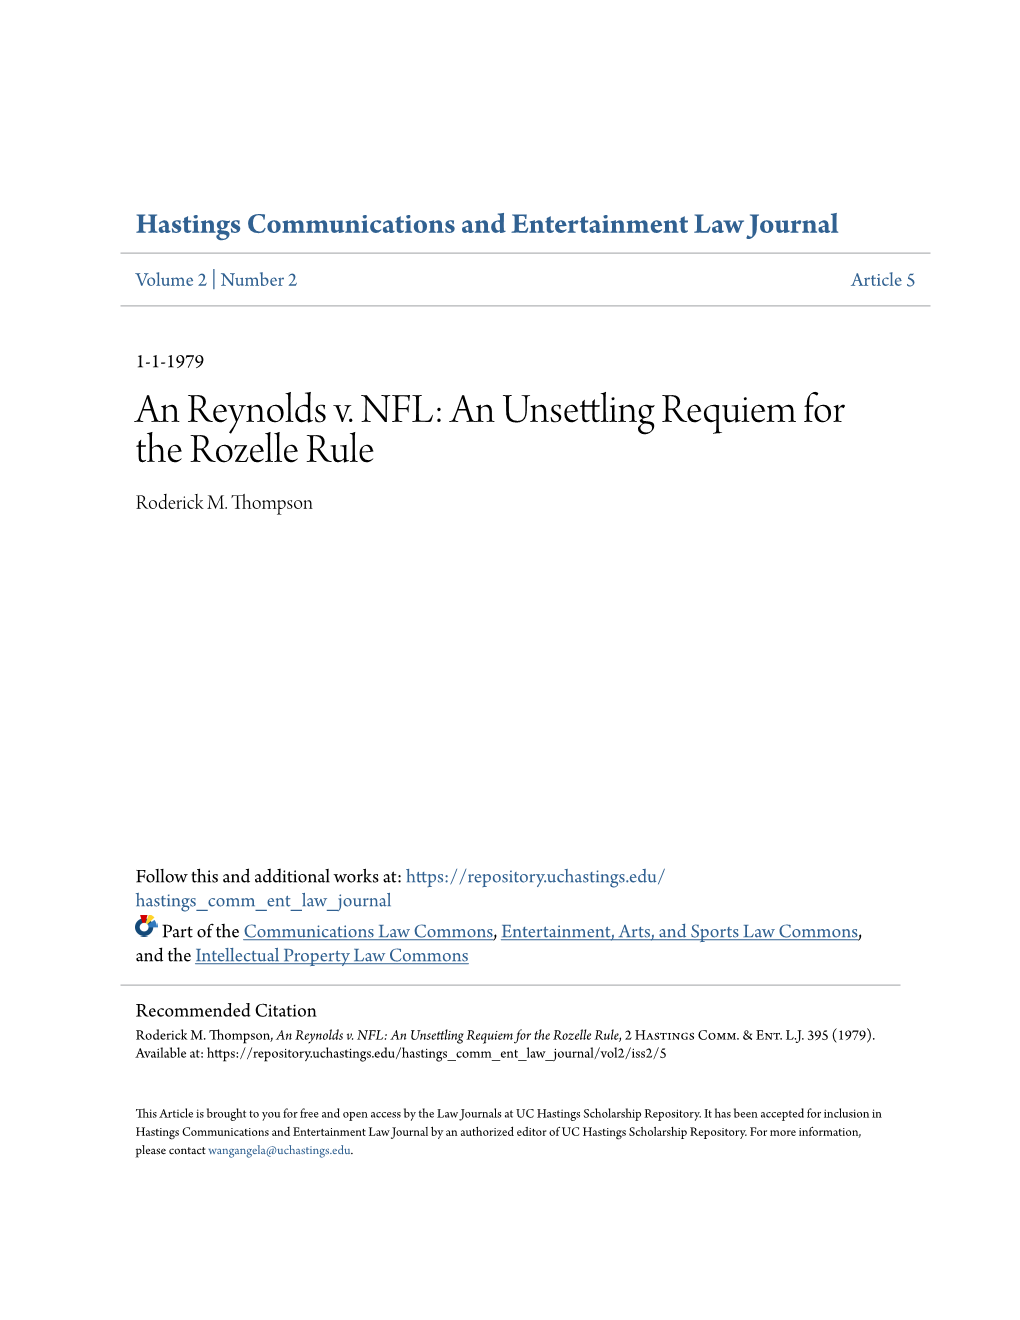 An Reynolds V. NFL: an Unsettling Requiem for the Rozelle Rule Roderick M